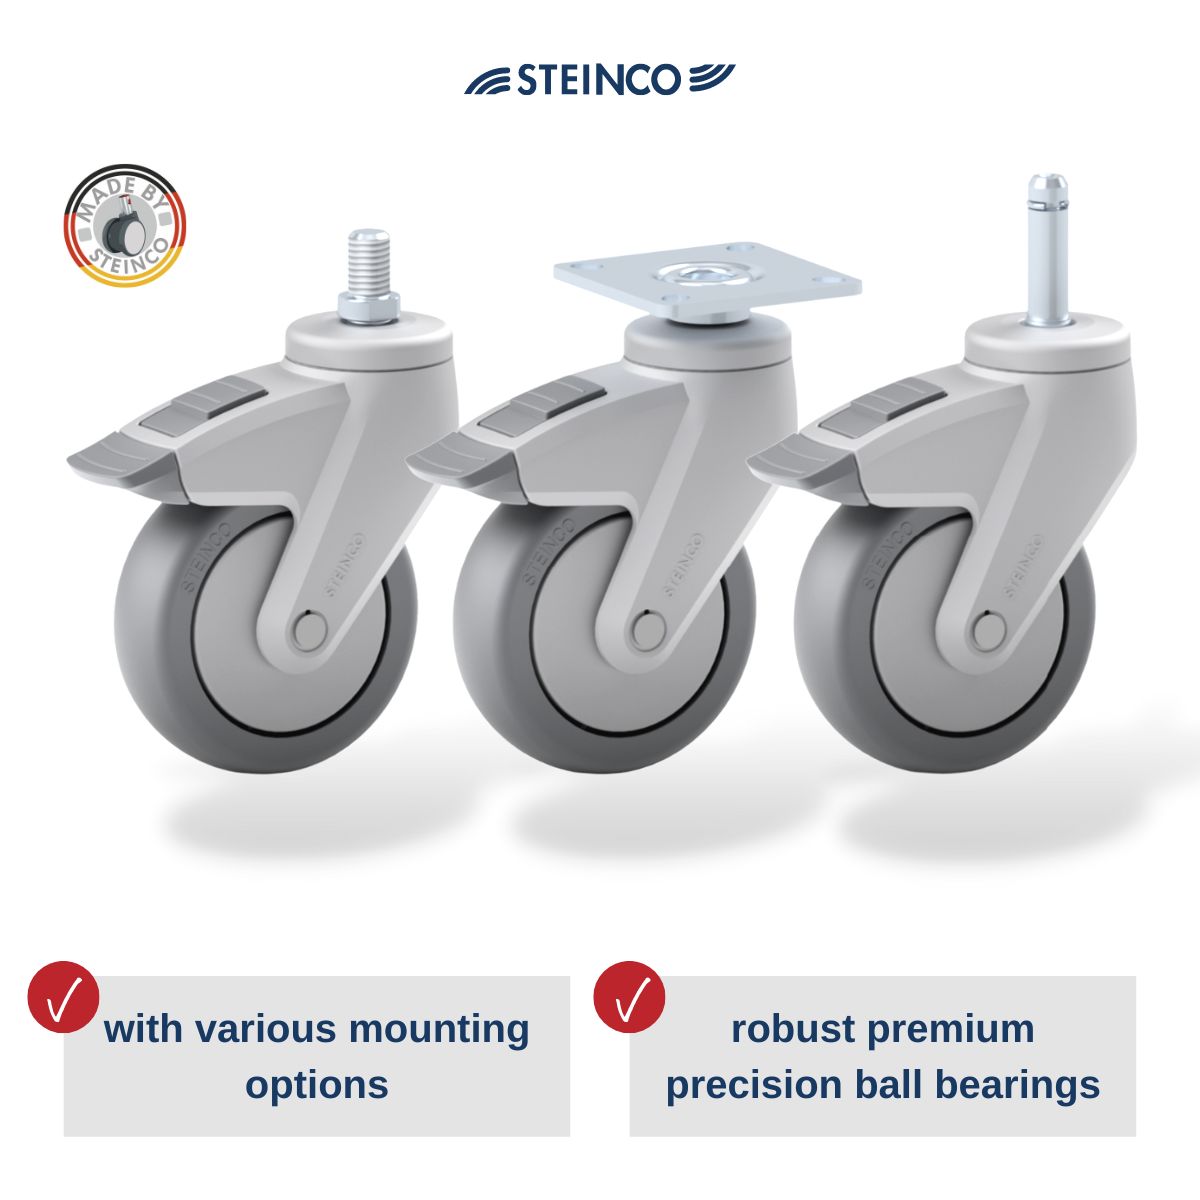 Steinco apparatus castors made of plastic in Ø 50, 65, 75, 100, - castors for conference room furniture & tables 125 & 150 mm - with bolt, plate or stem - with or without brake - castors & wheels especially for laboratory furniture & office furniture